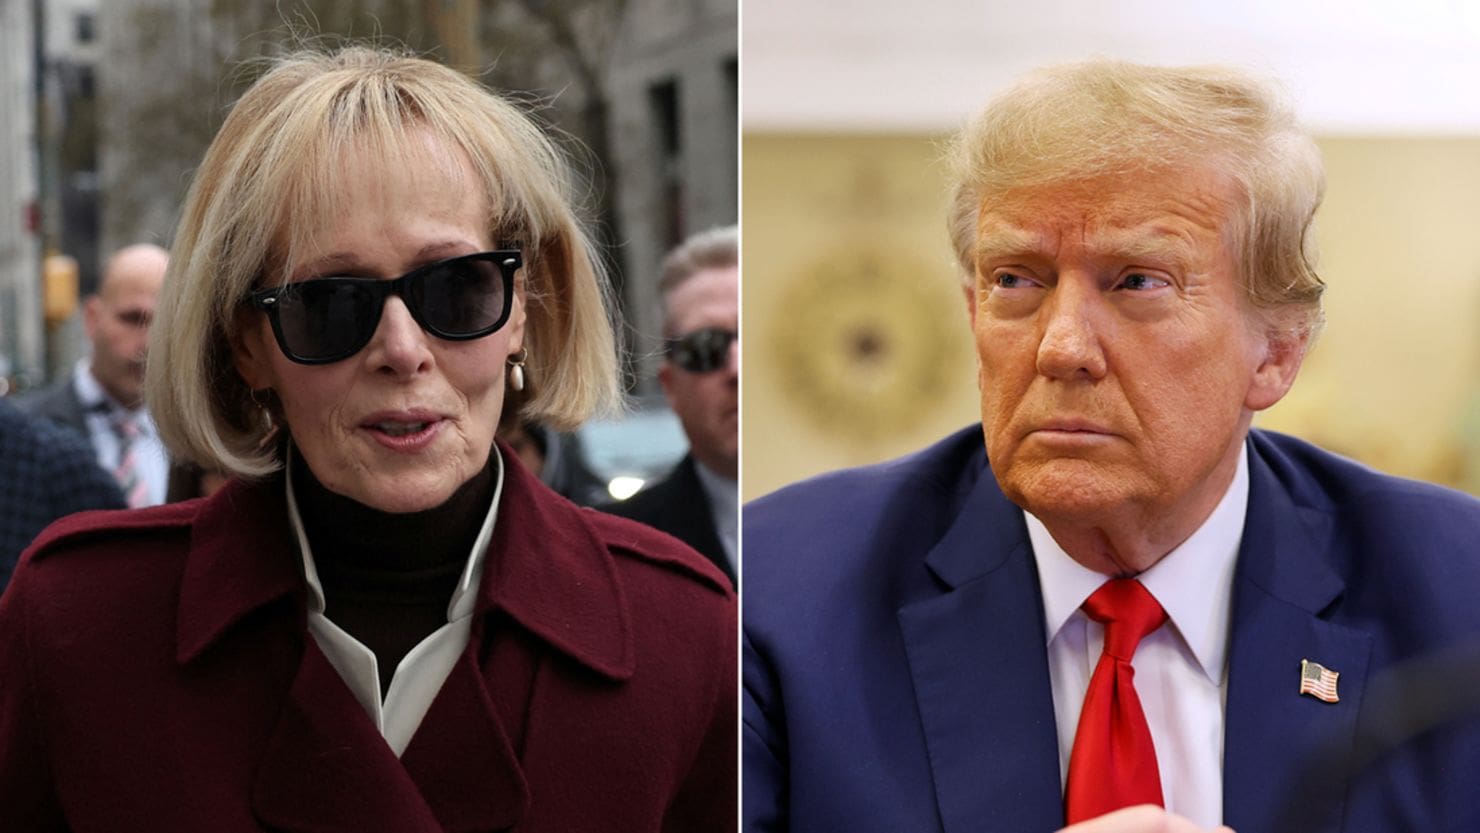 Trump Must Pay E. Jean Carroll $83.3 Million More in Damages, Jury Awards